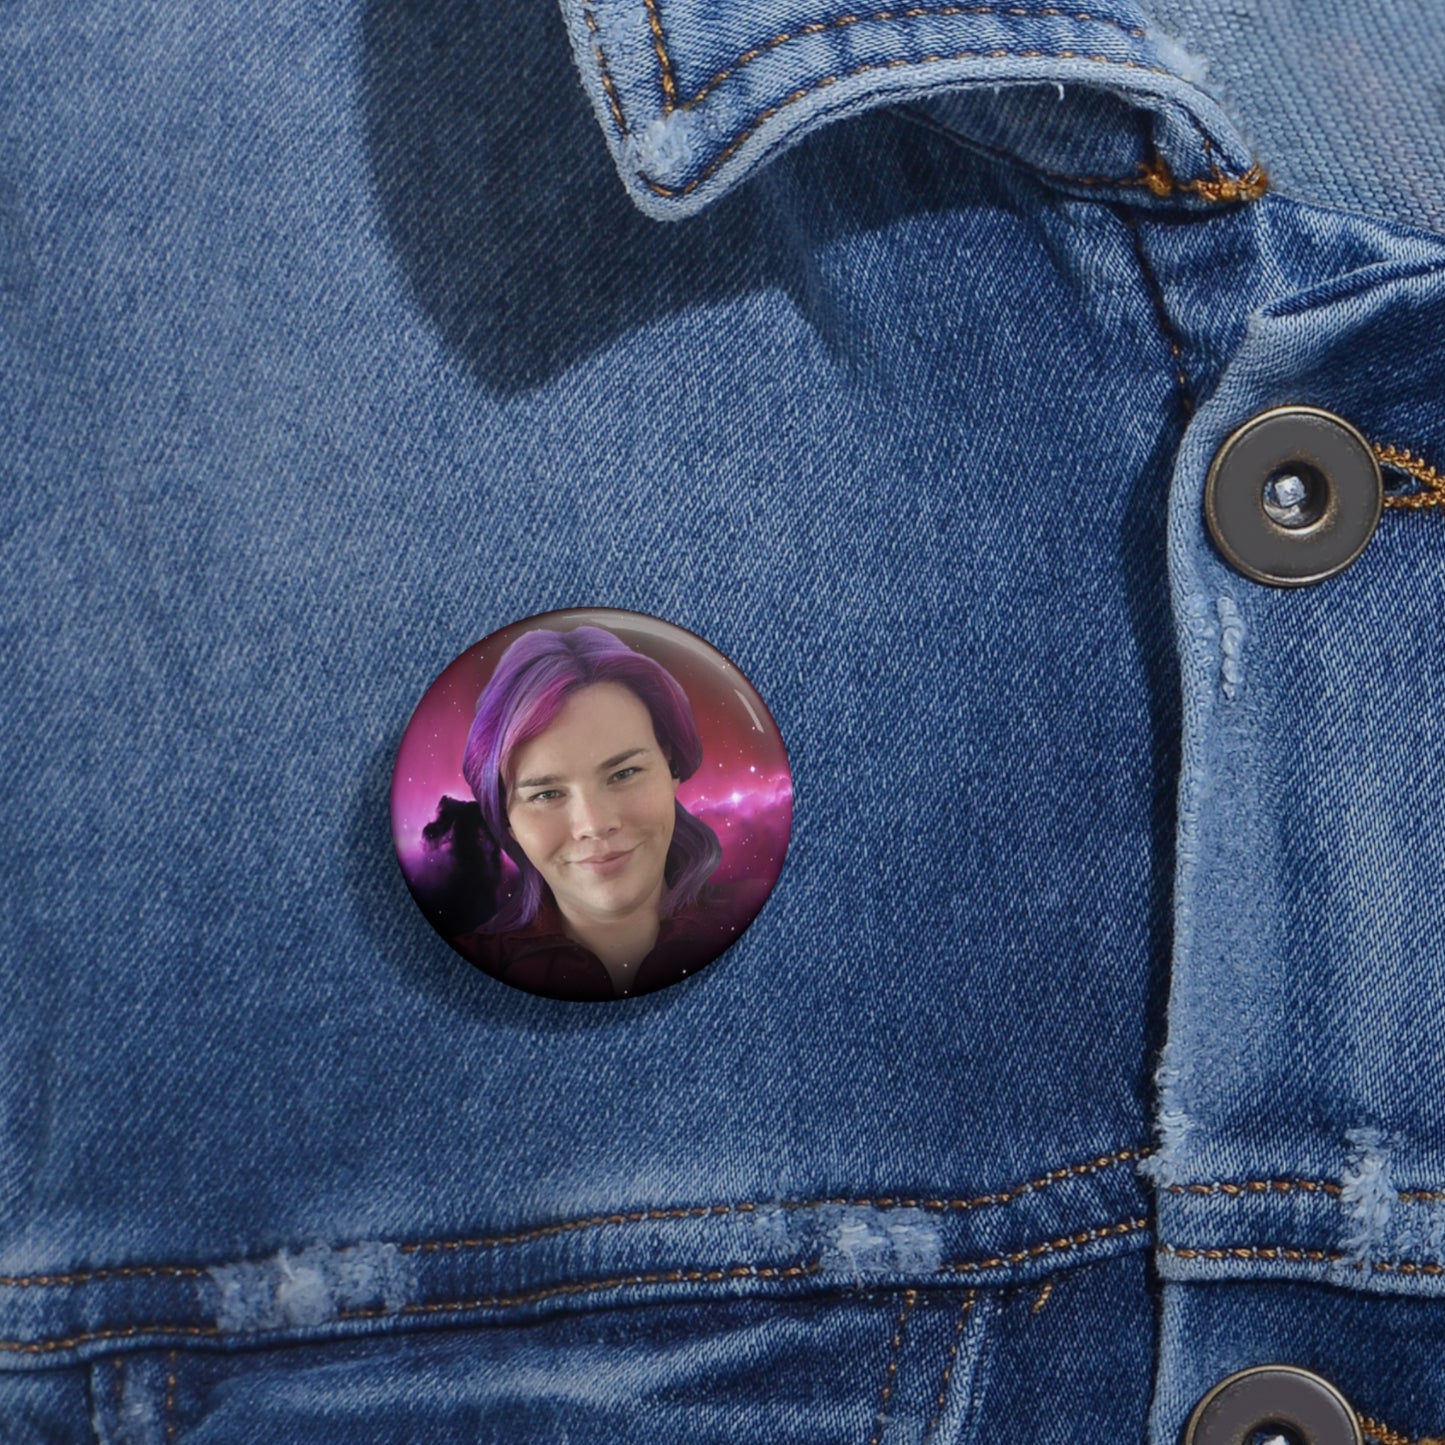 Jami's Face - Space NEWS - Pin Buttons 1.25" / 2.25" - W